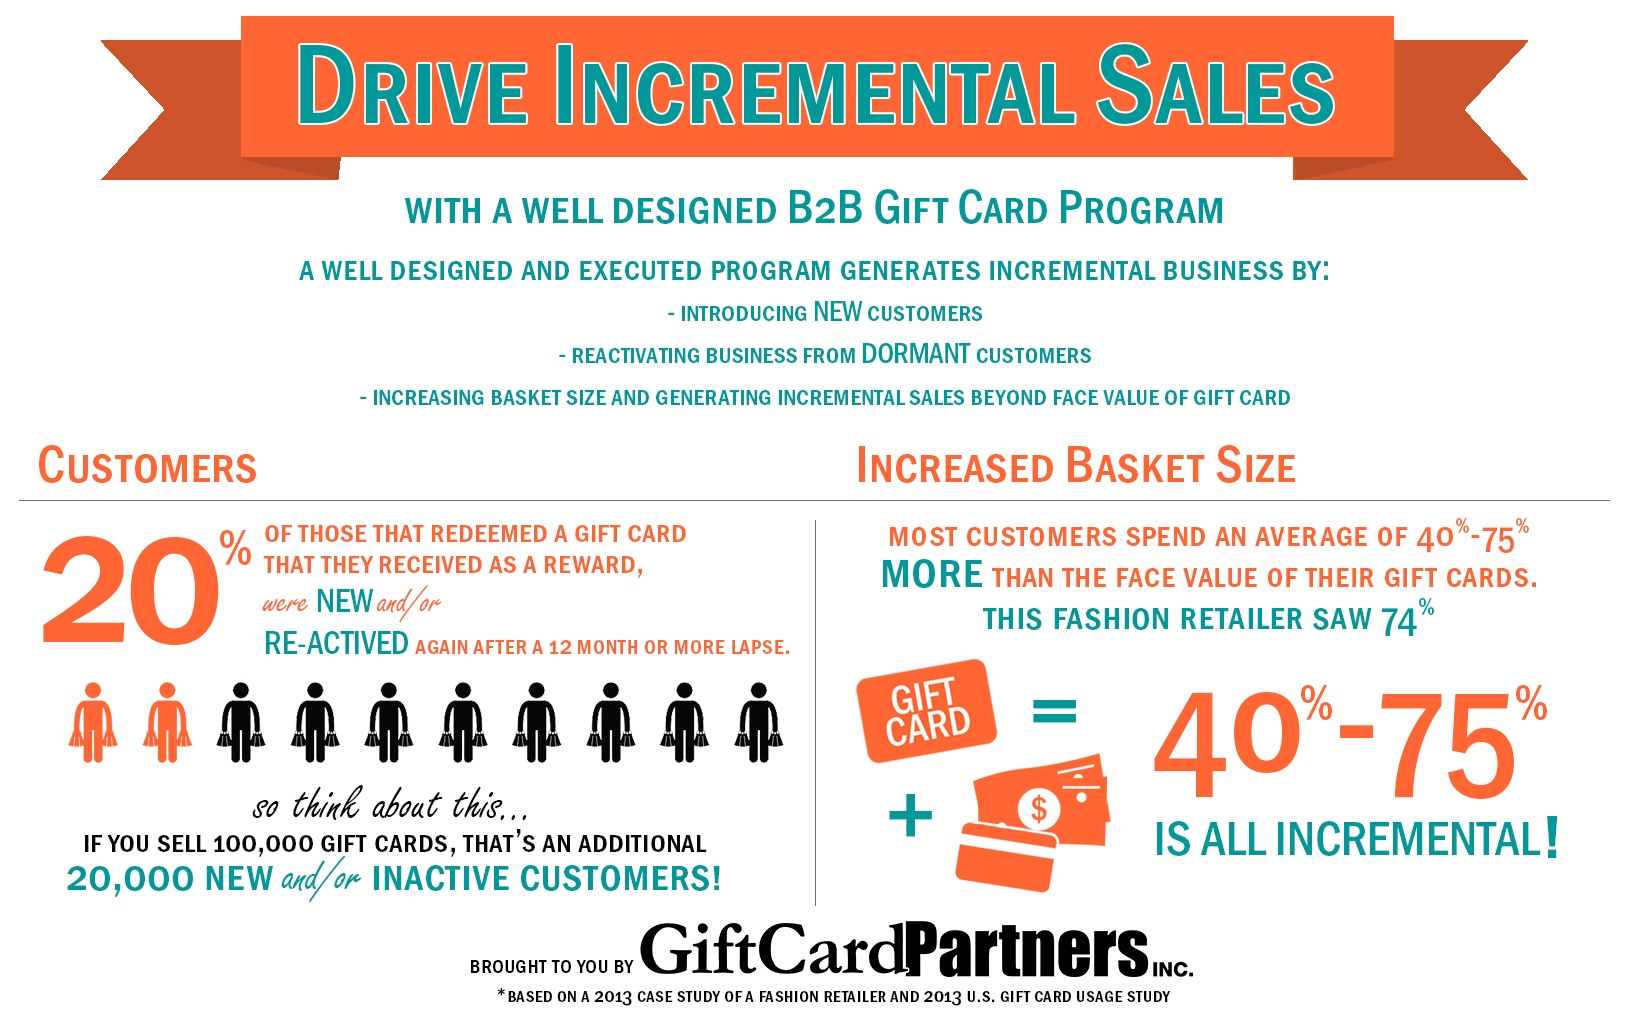 [Infographic] Drive Incremental Sales with B2B Gift Card Program